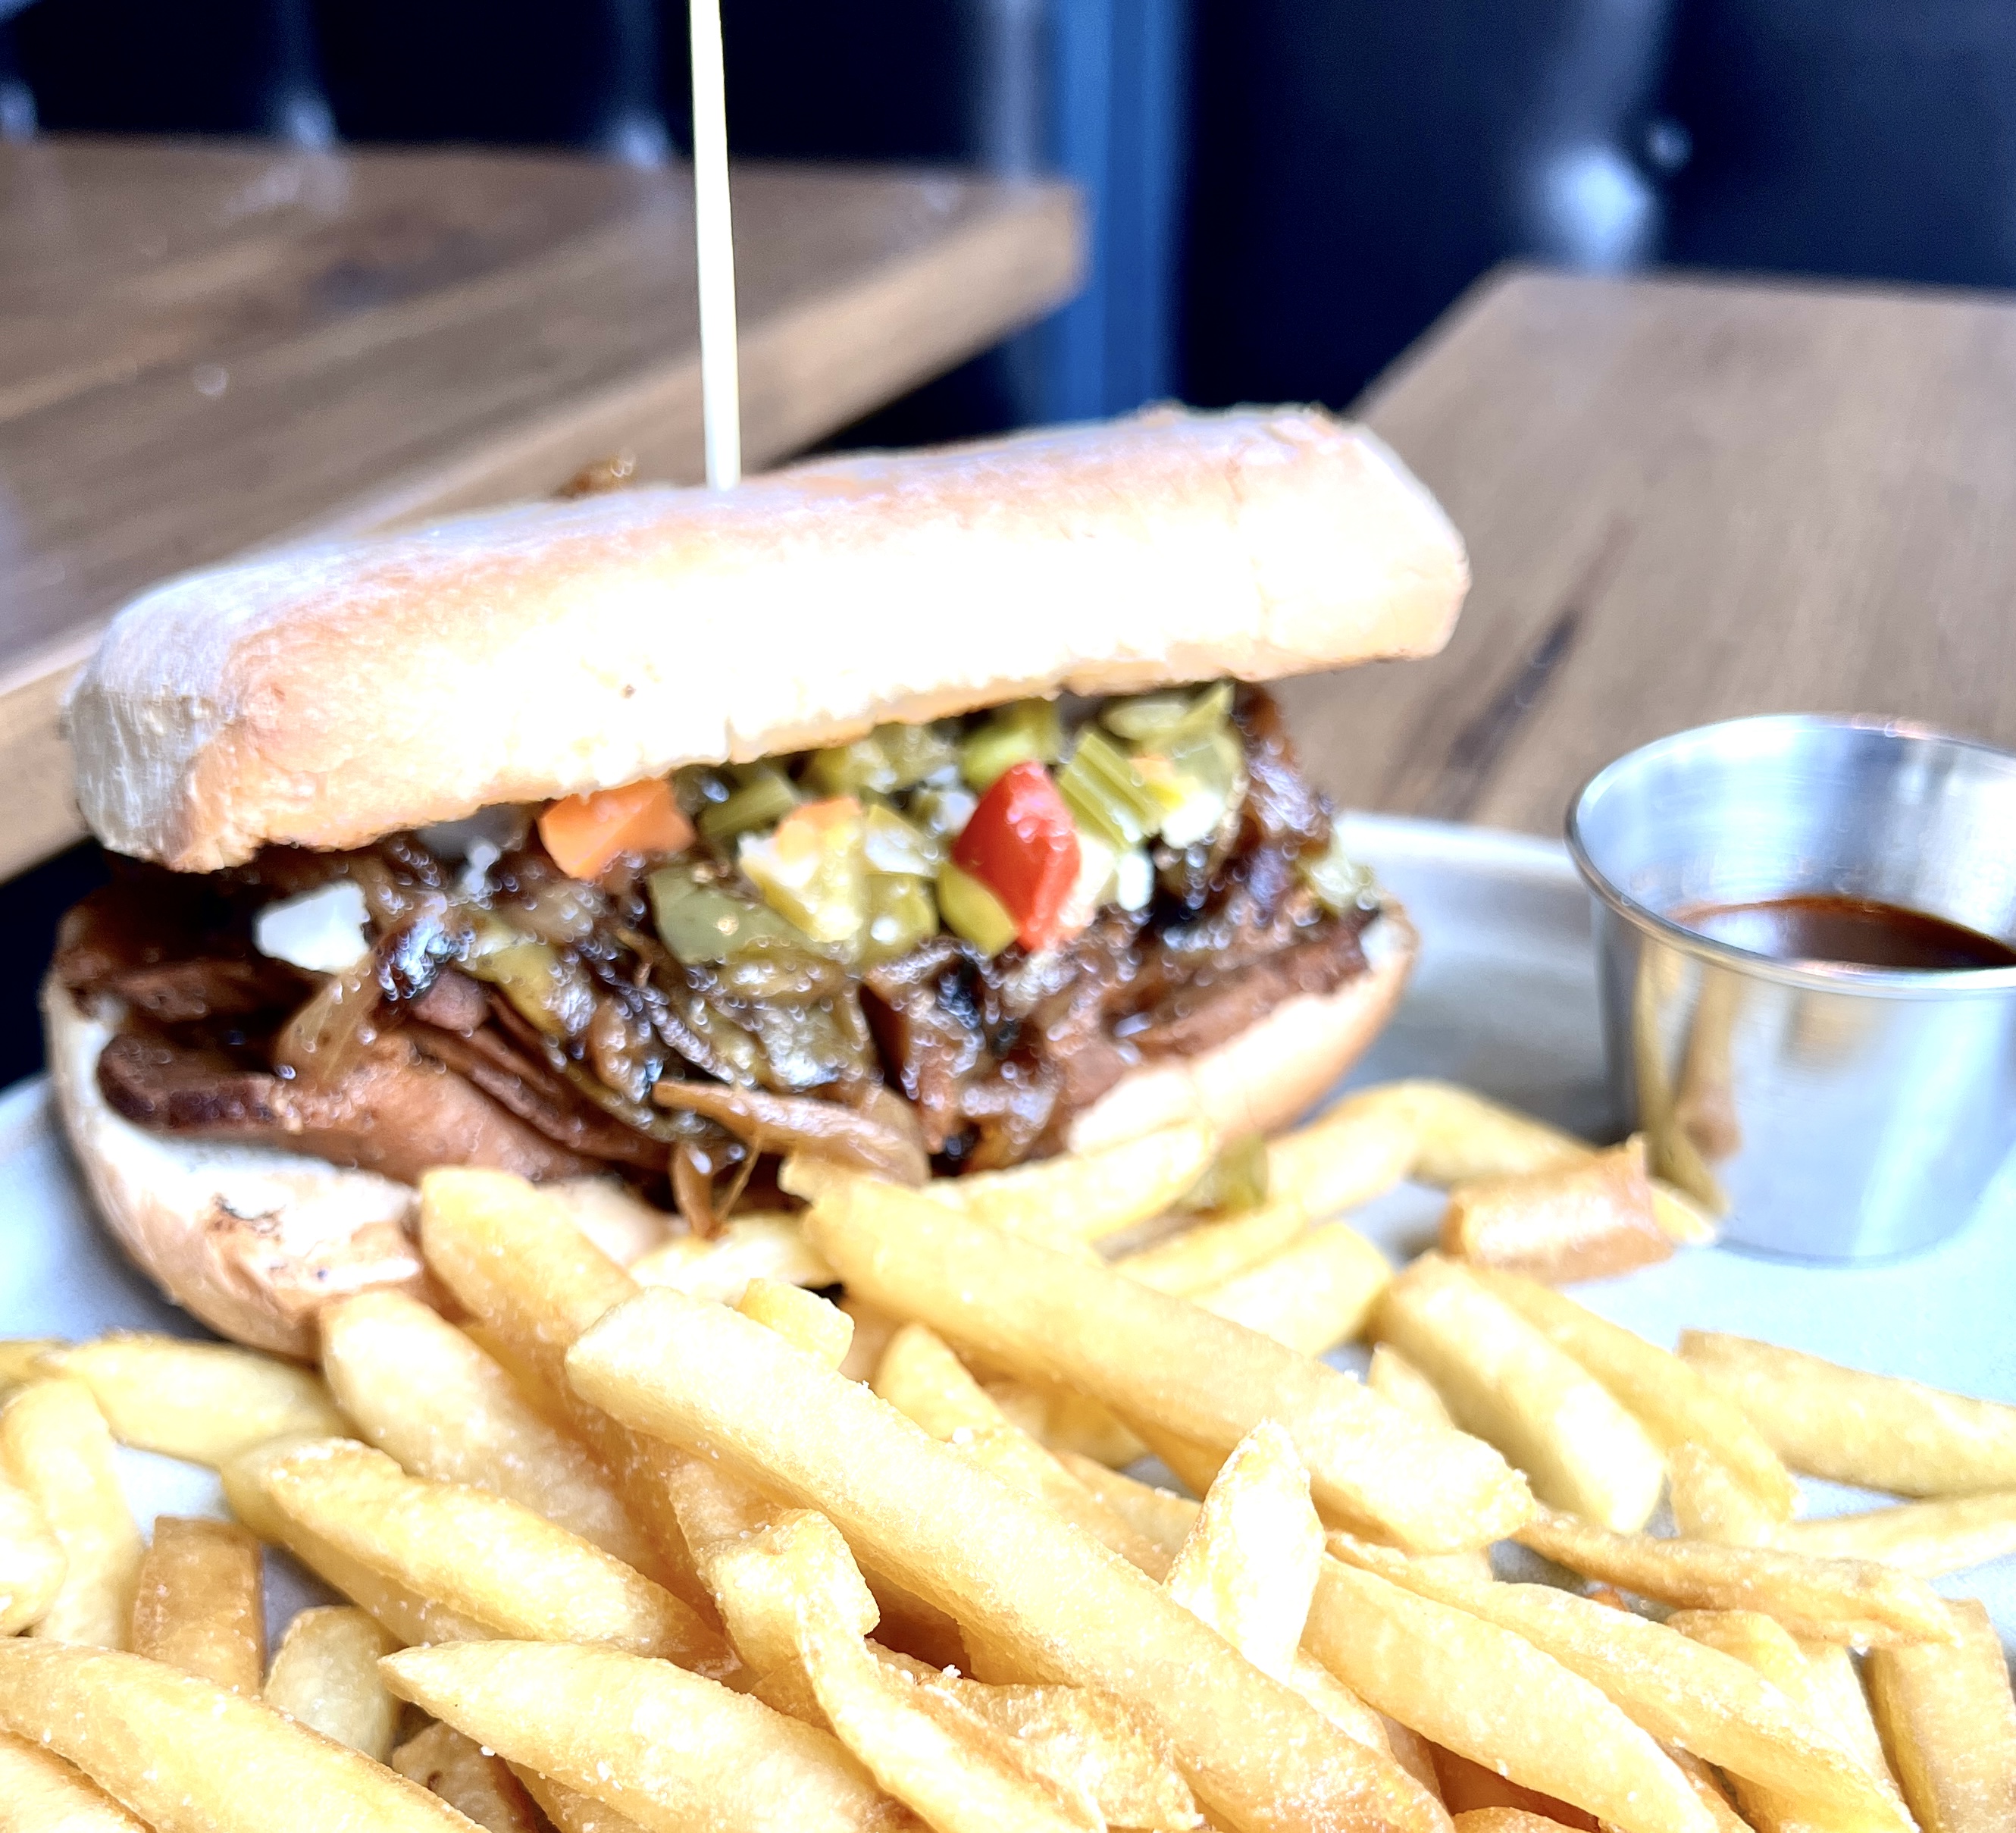 A vegan Italian beef with fries.